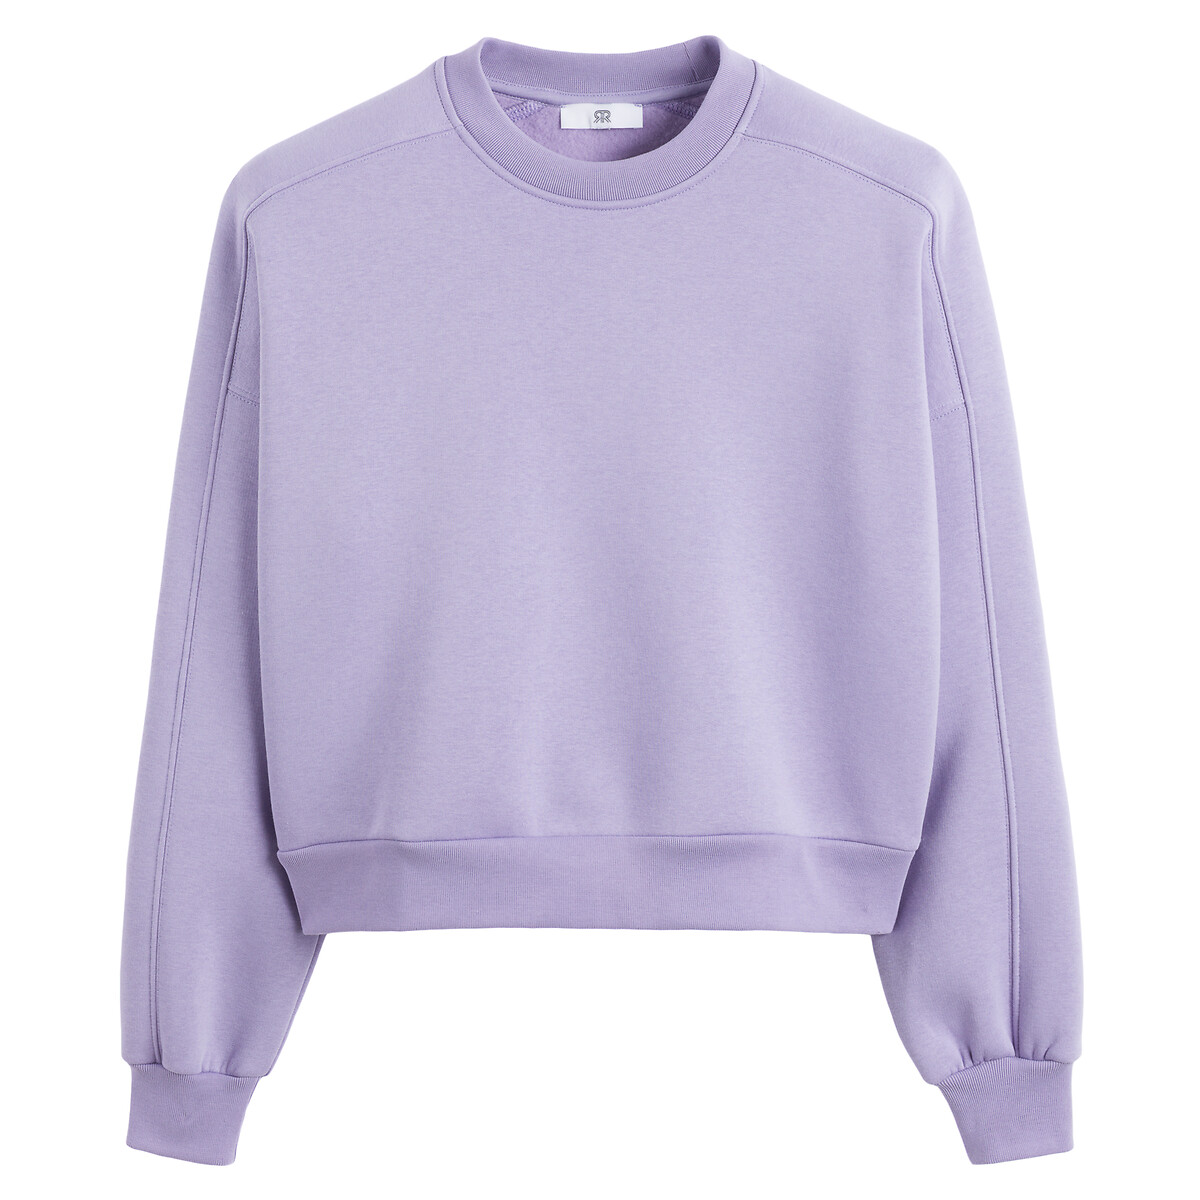 Sweatshirt in Cropped-Form von LA REDOUTE COLLECTIONS